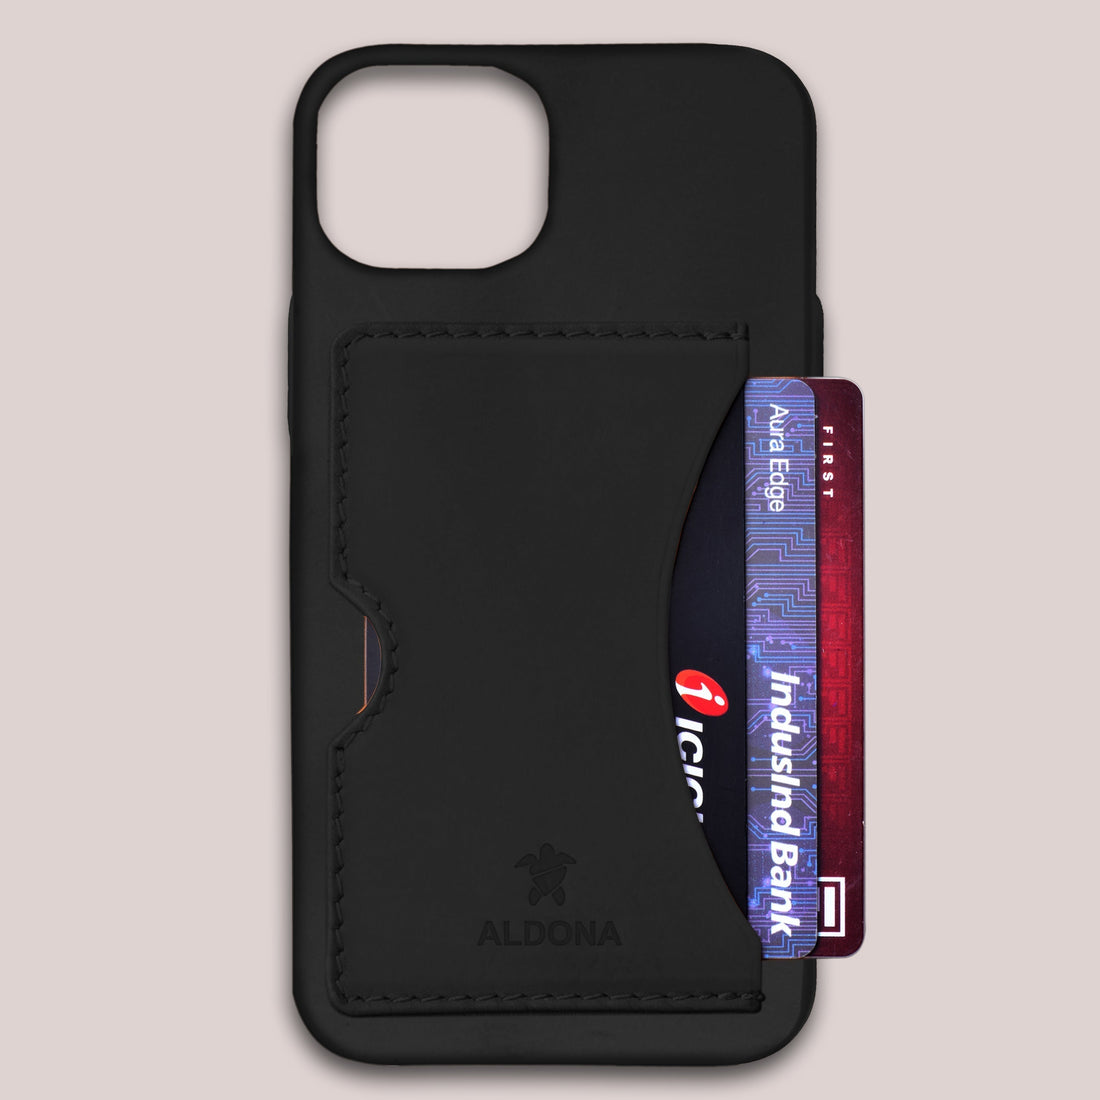 Baxter Card Case for iPhone 12 Pro Max - Onyx Black